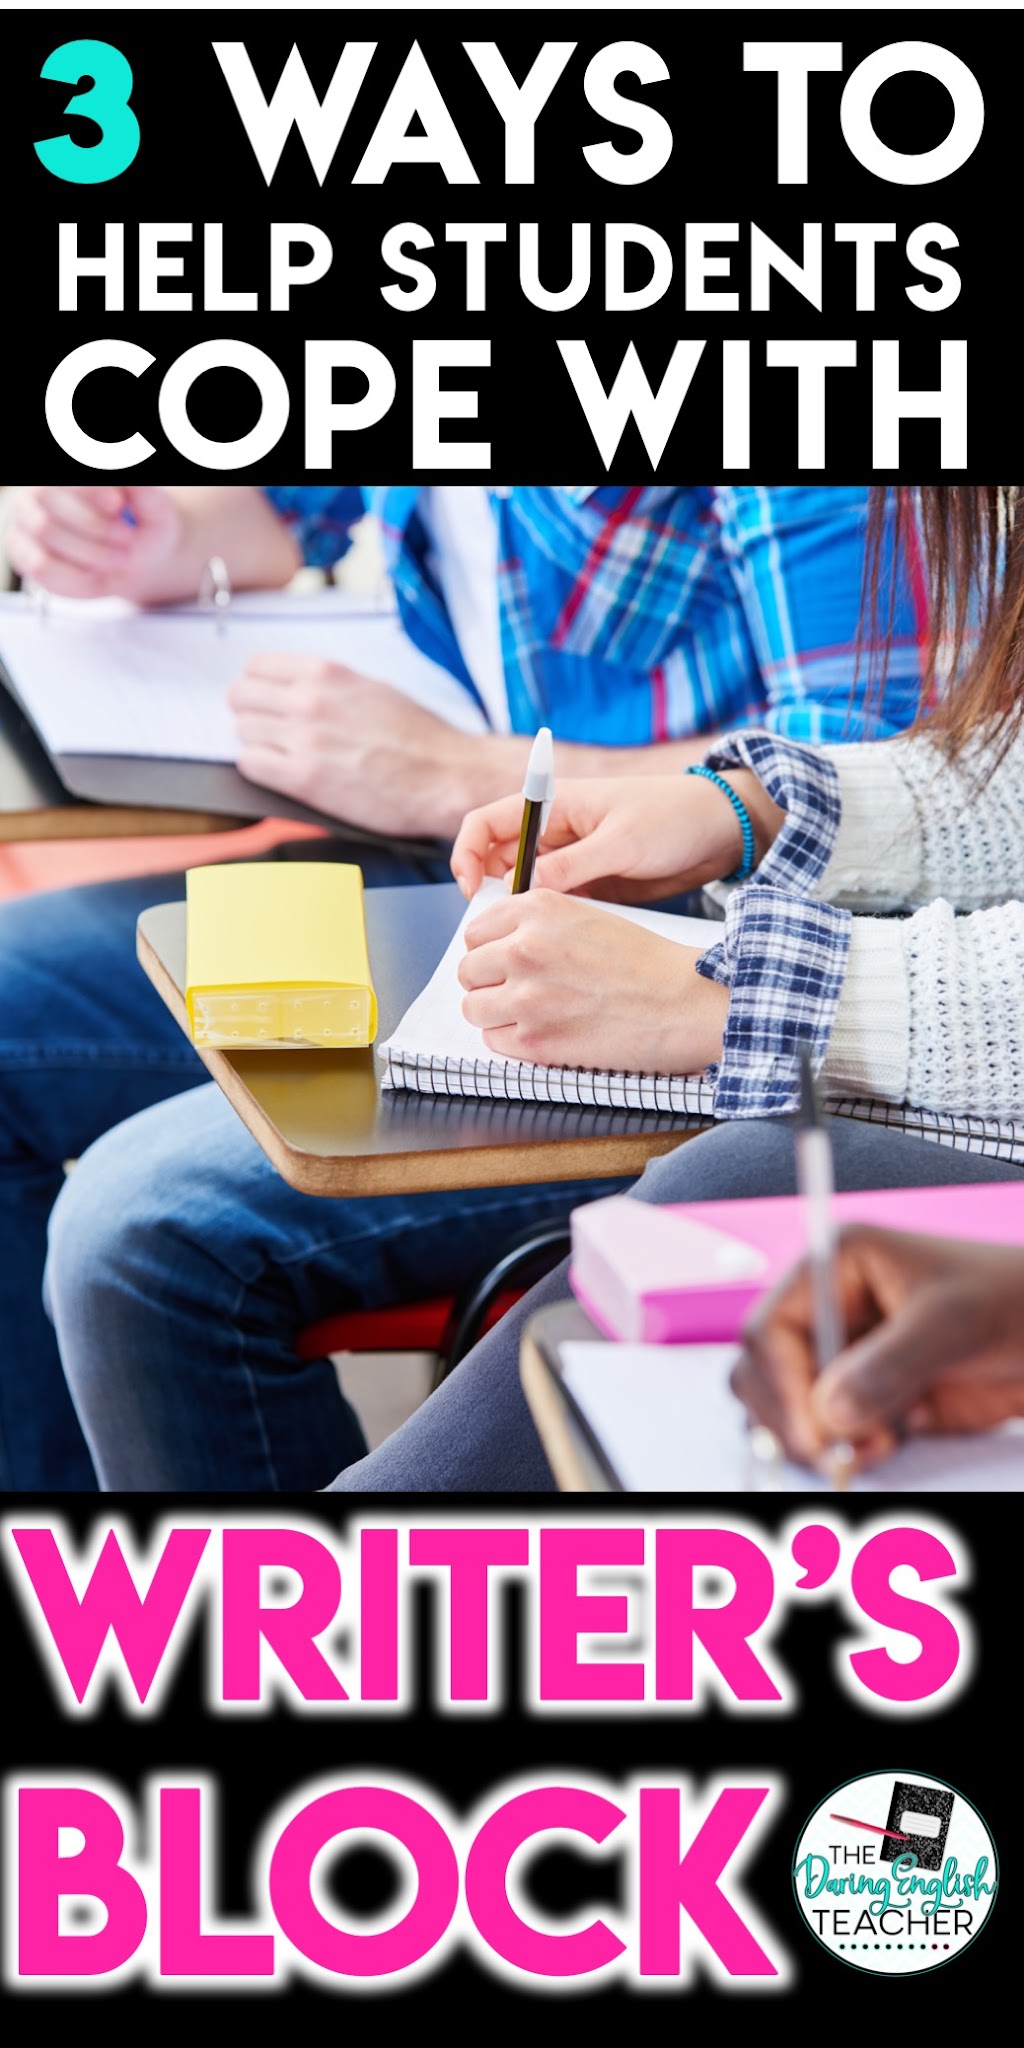 3 Ways to Help Students Cope with Writer's Block